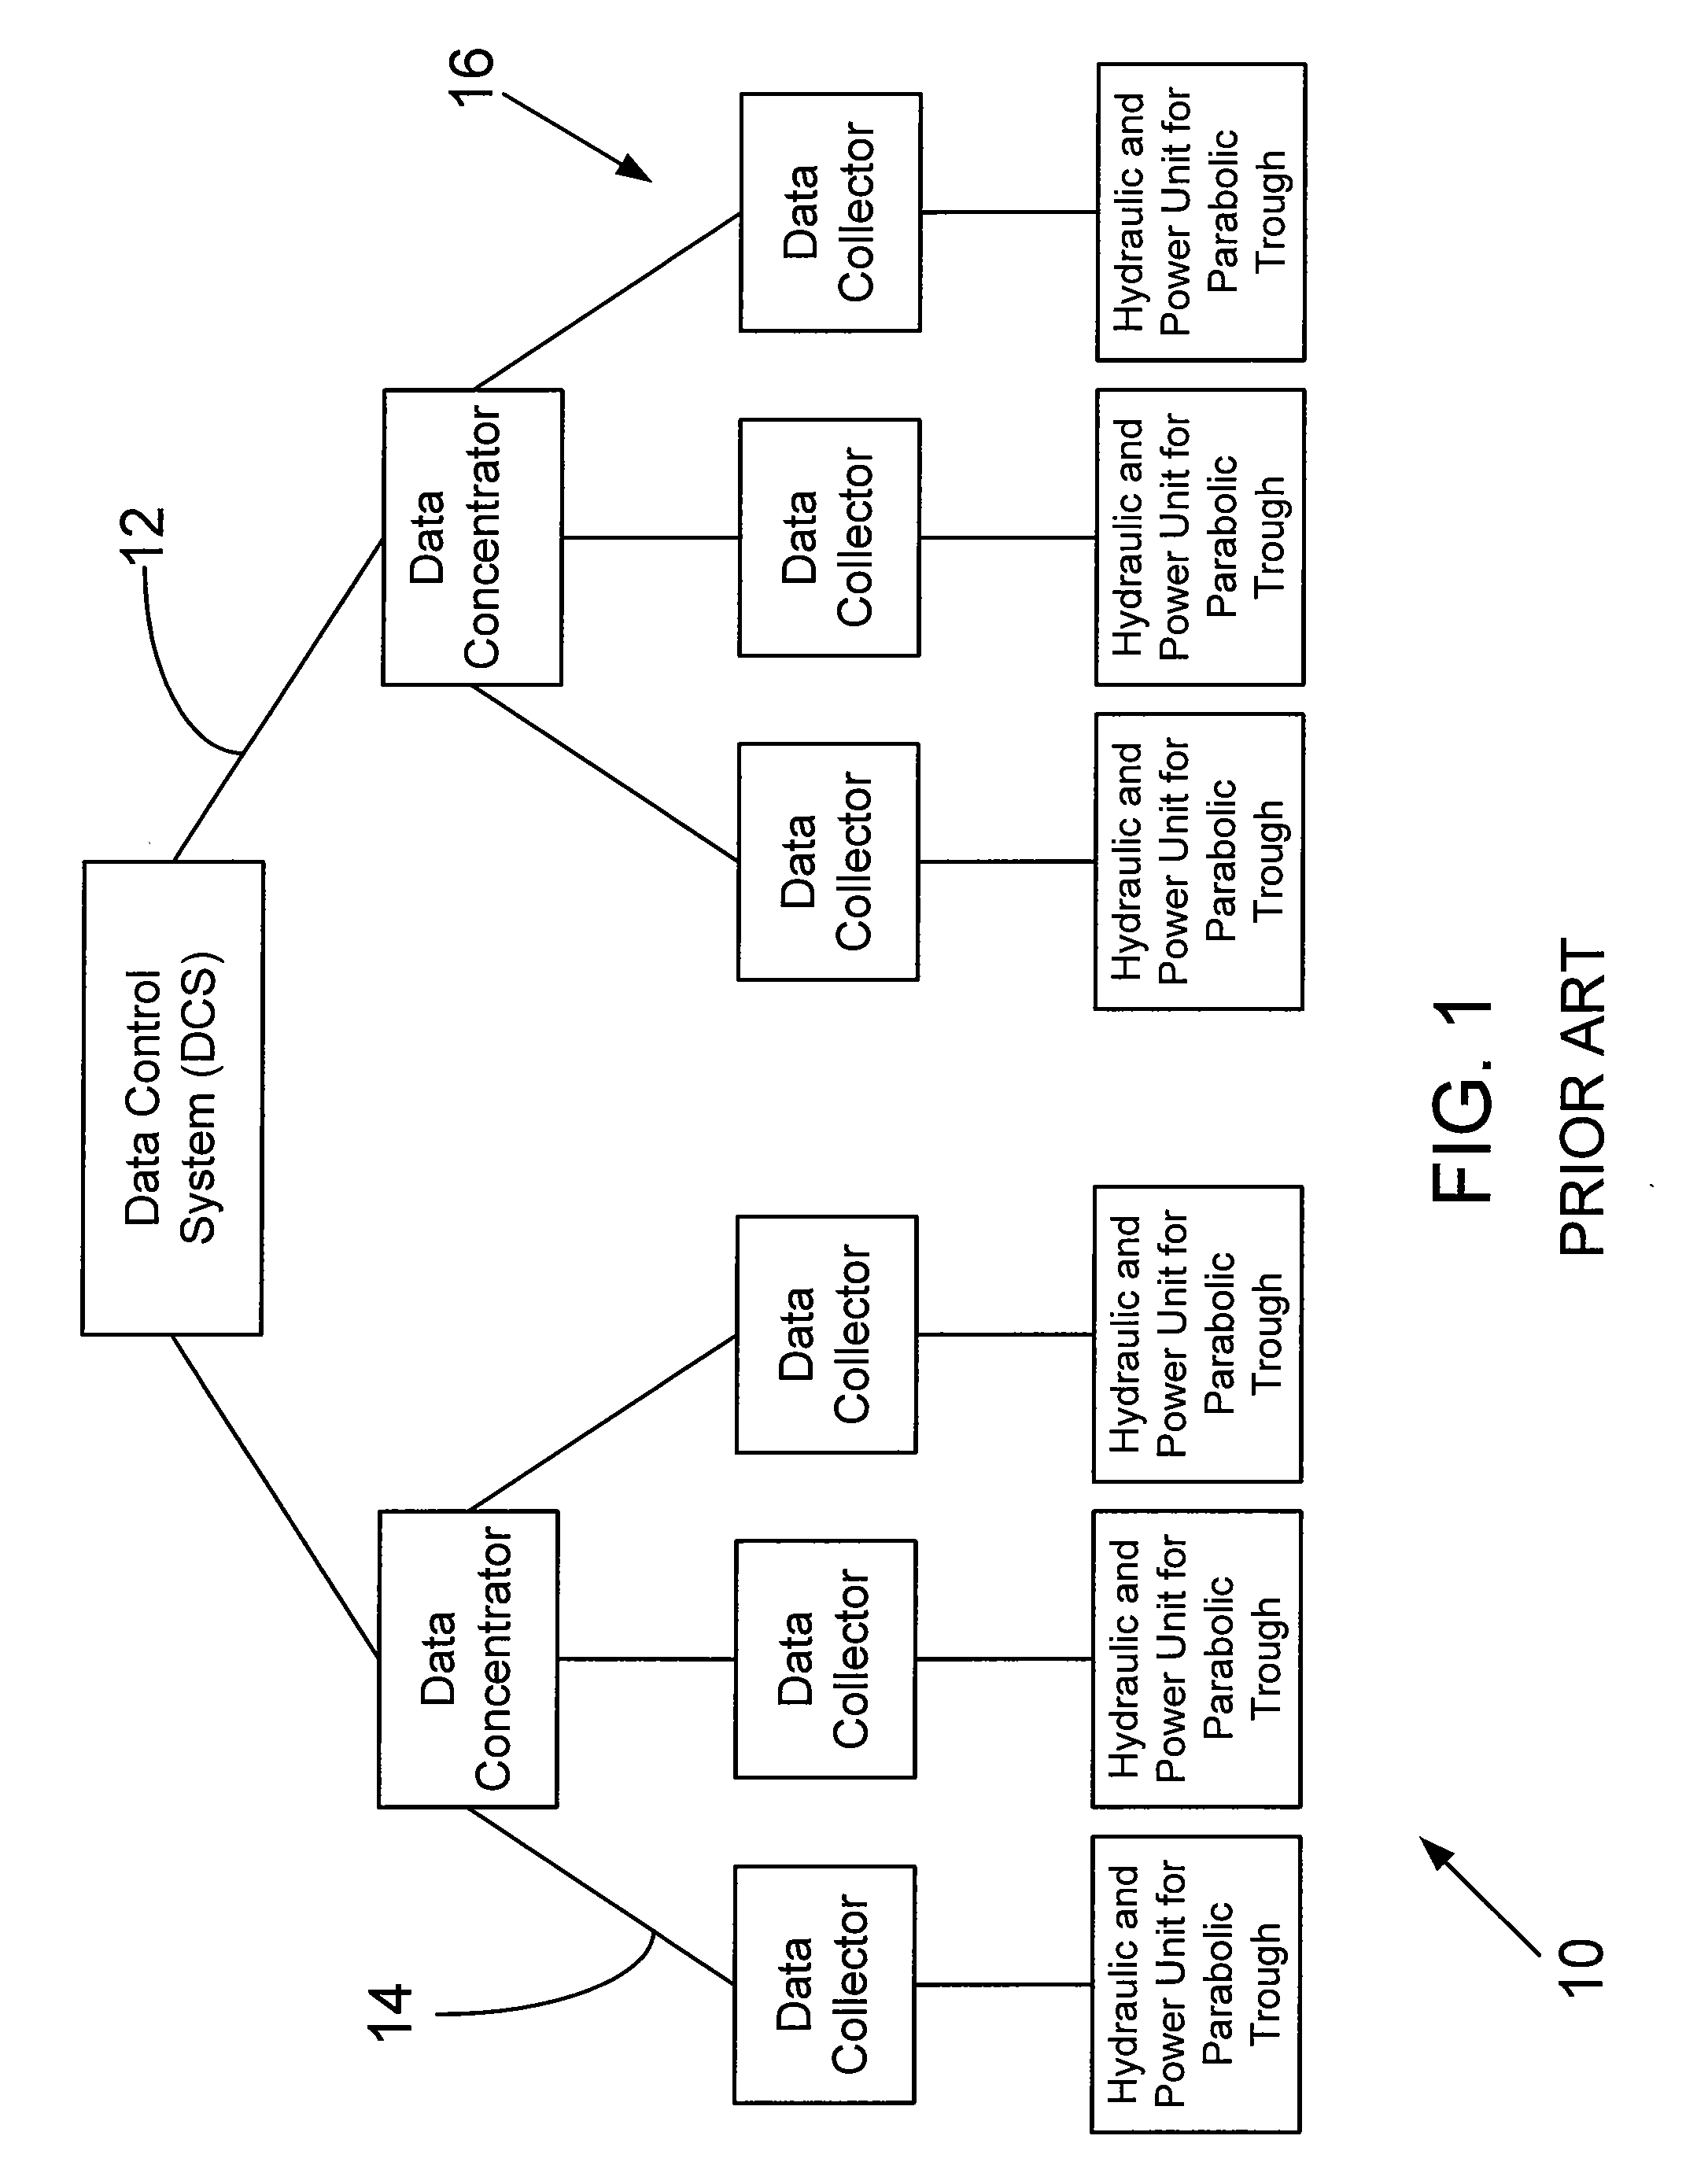 Method for robust wireless monitoring and tracking of solar trackers in commercial solar power plants